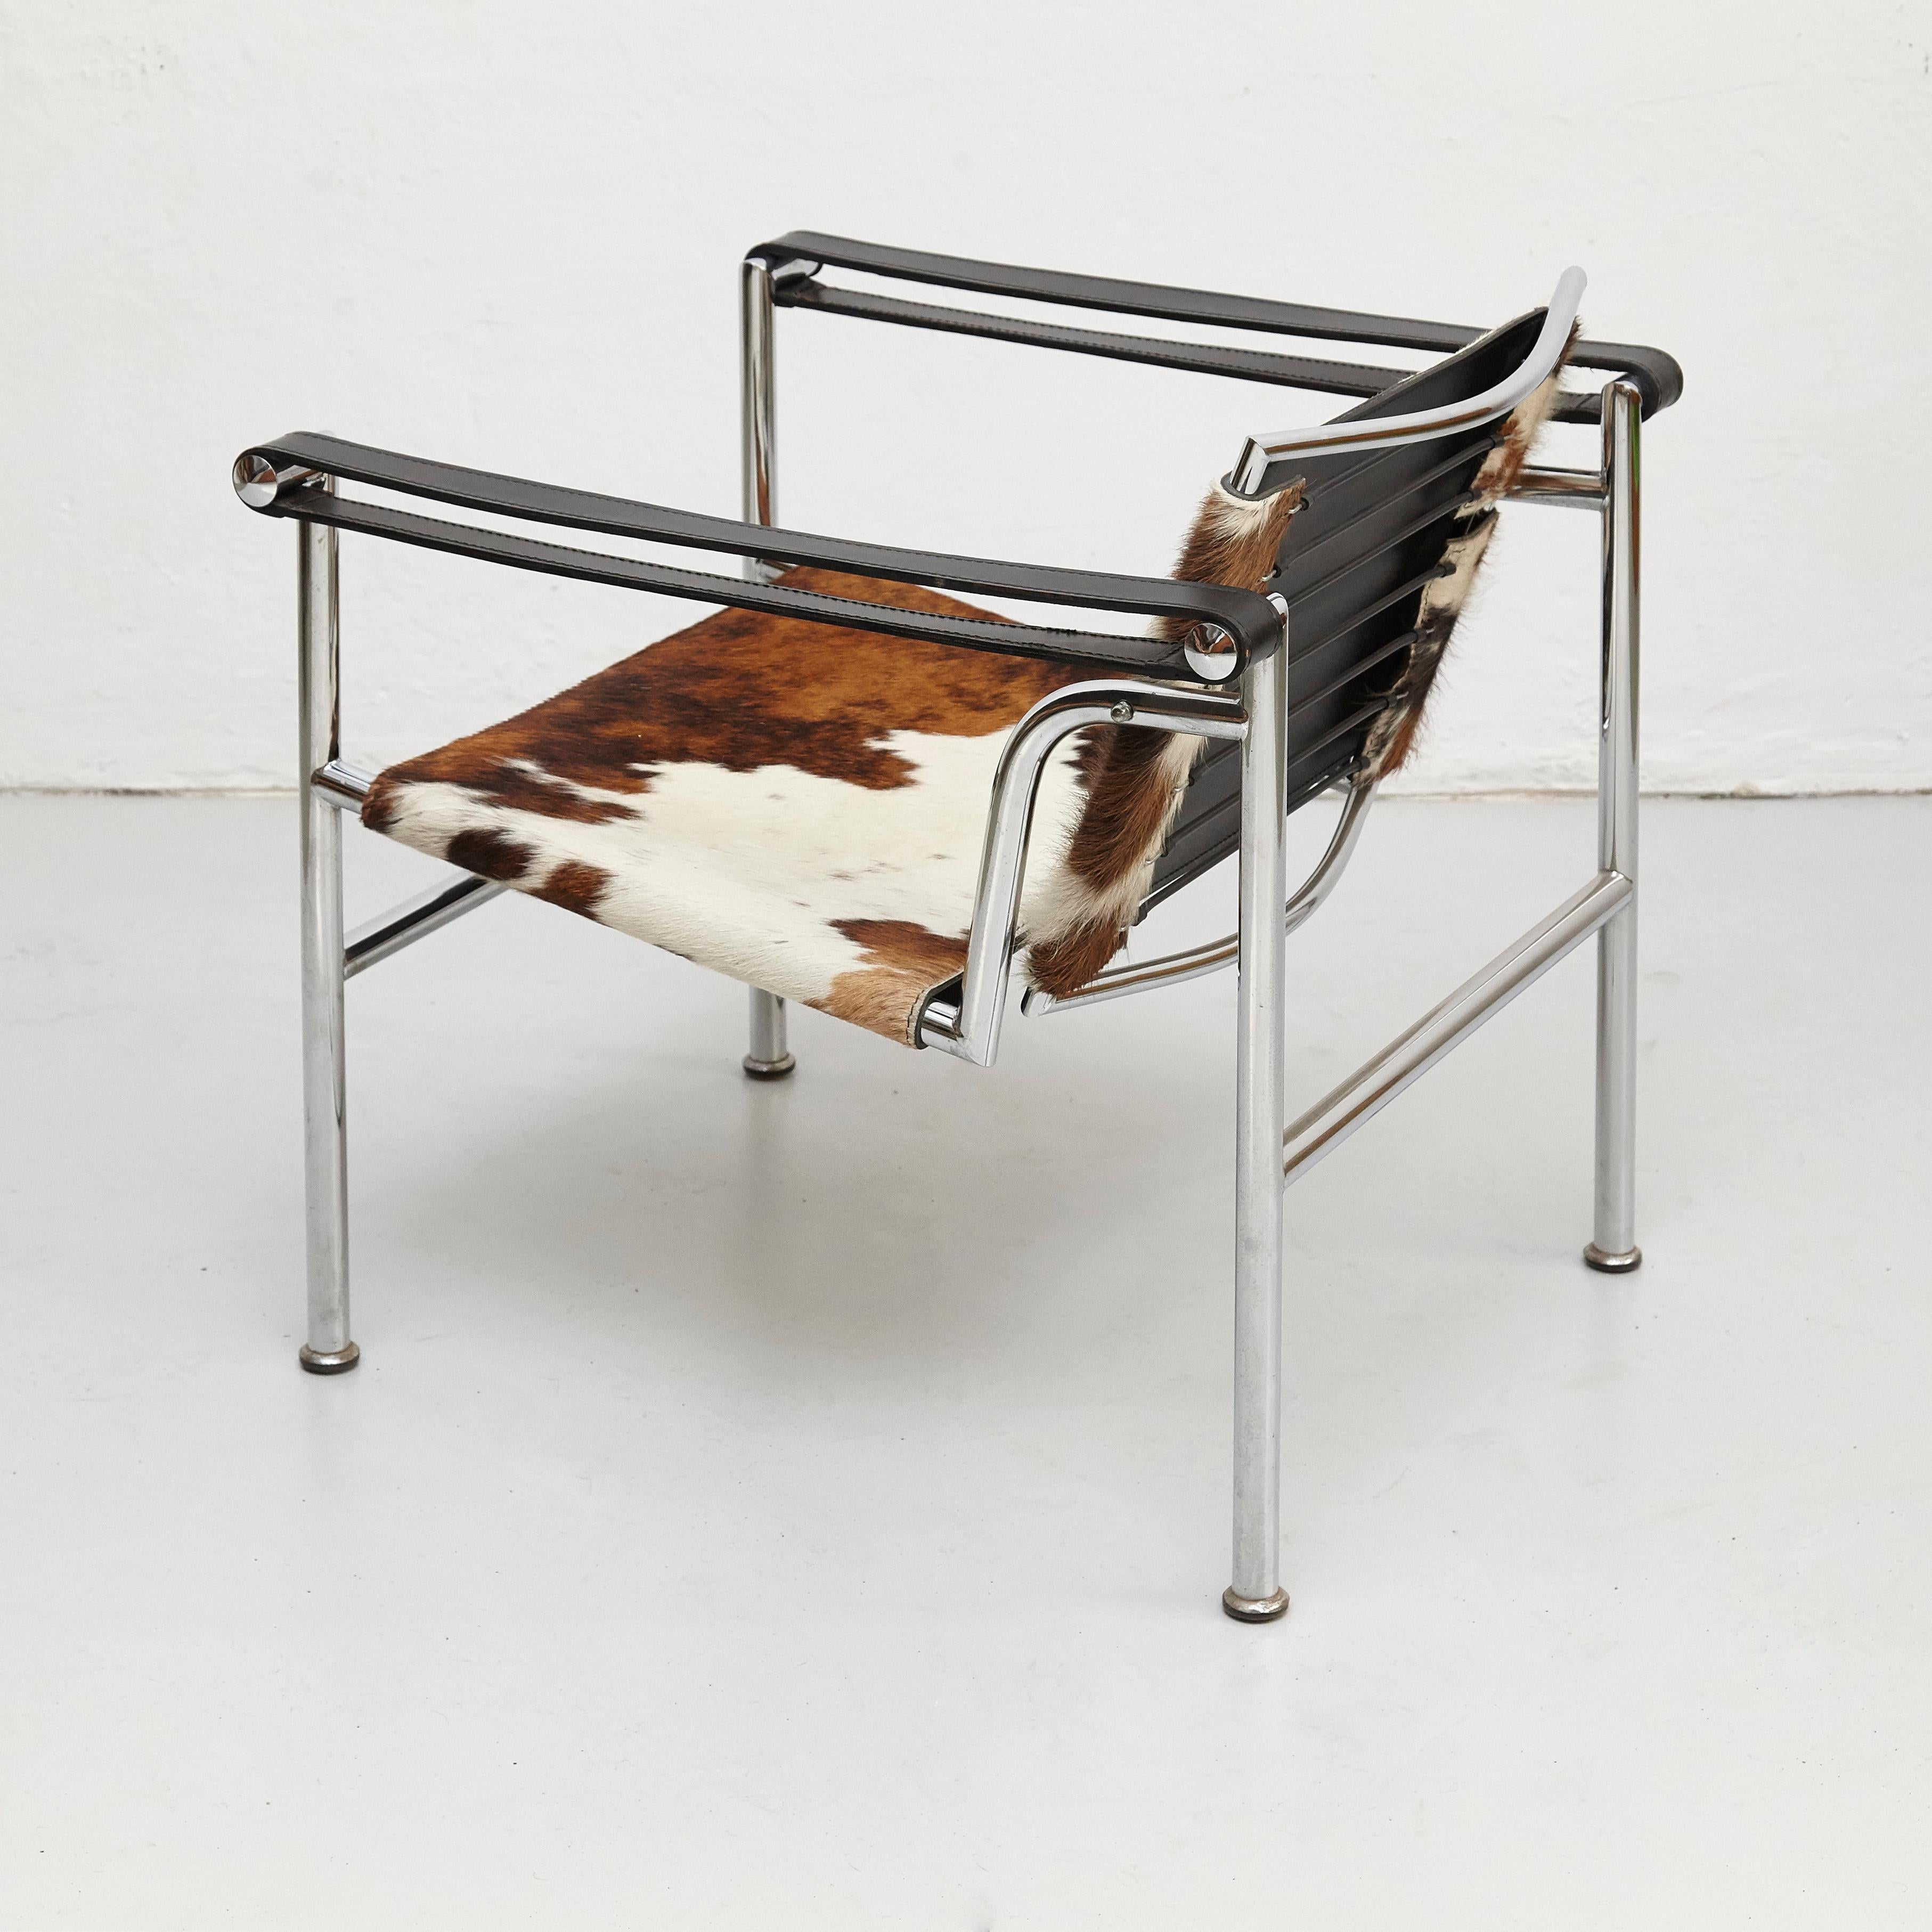 Le Corbusier, Pierre Jeanneret and Charlotte Perriand LC1 Pony Skin lounge chair 
chromed steel, leather and pony skin.
By unknown manufacturer.
Manufactured circa 1970.

In good original condition with minor wear consistent of age and use,